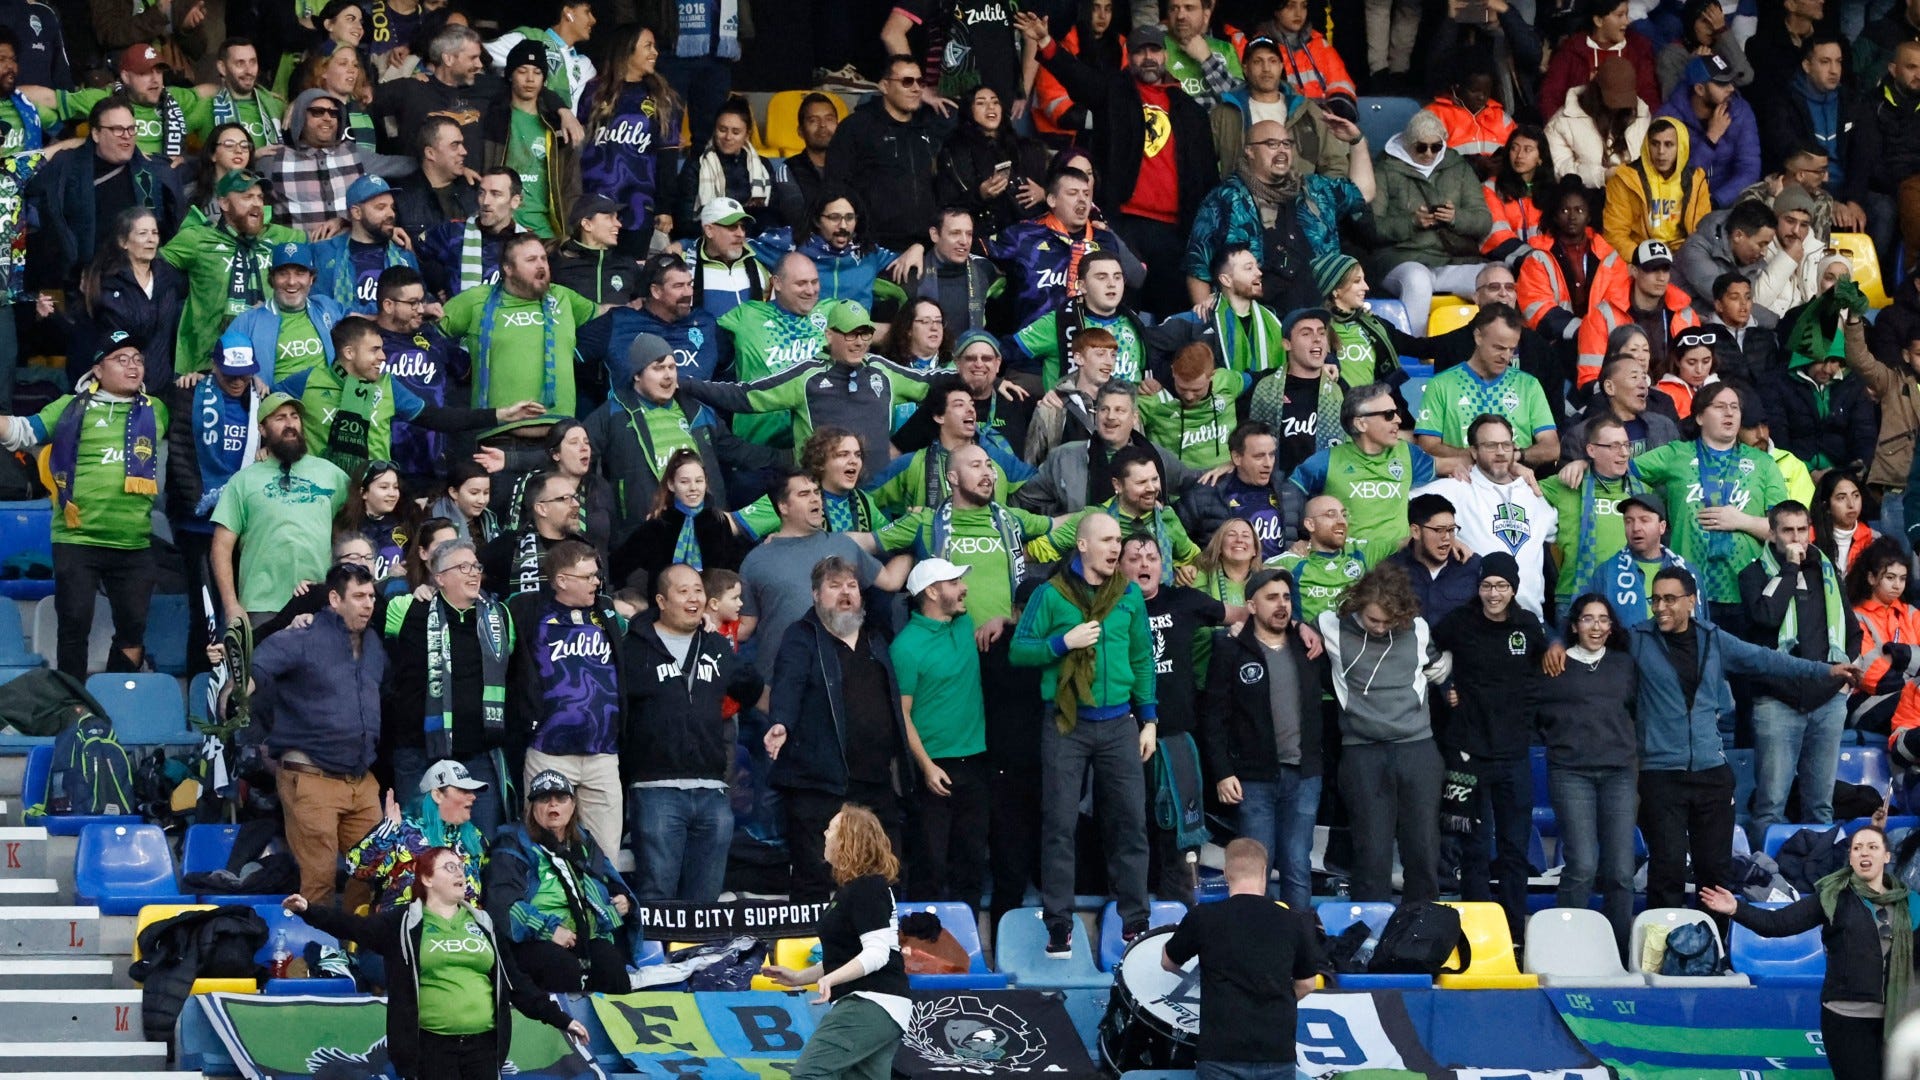 Sounders Club World Cup fans